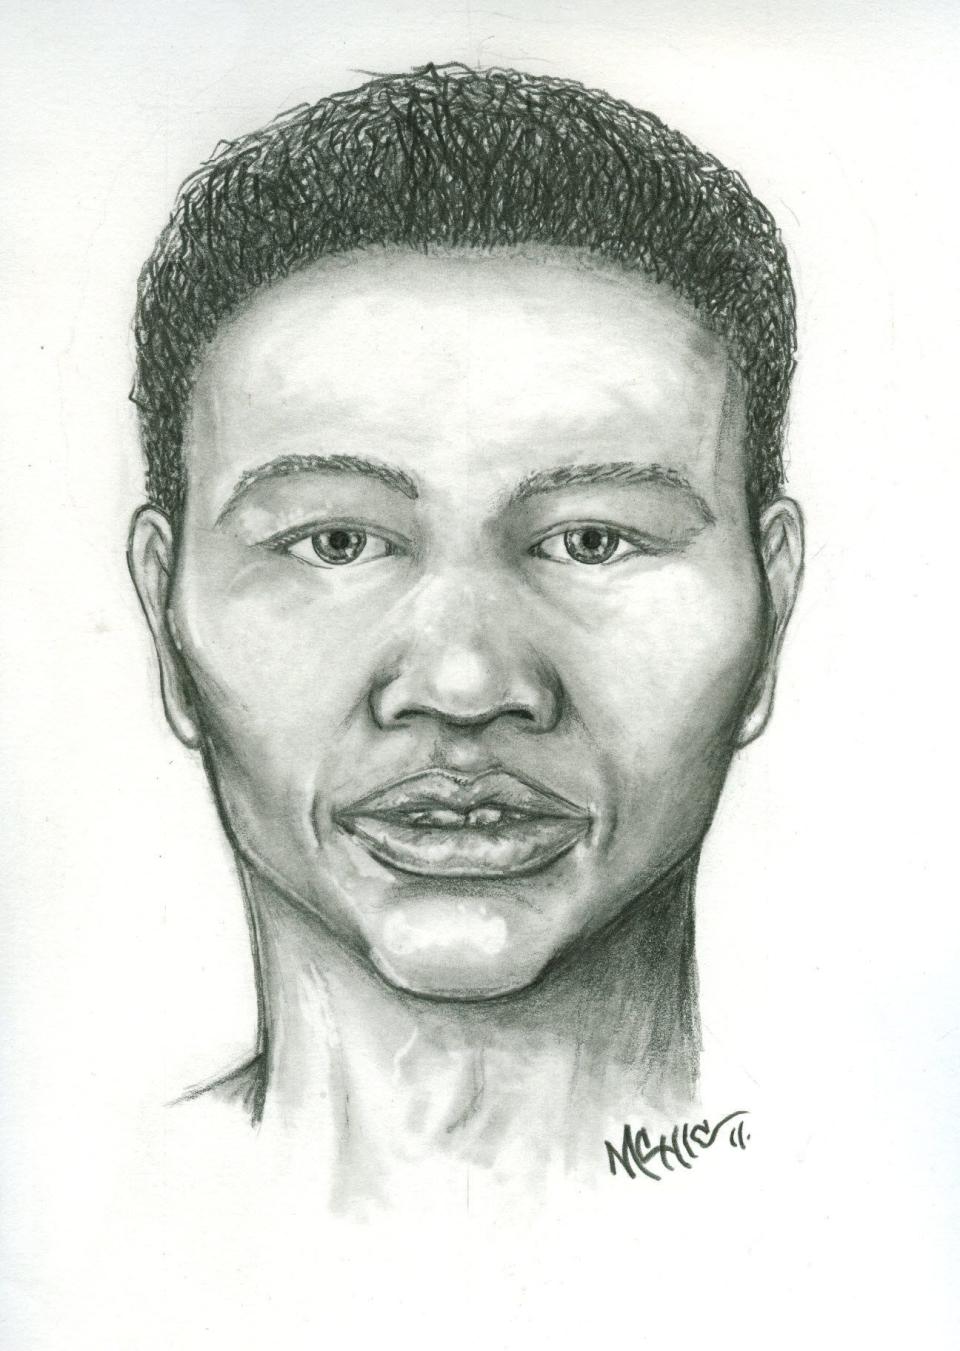 This is evidence in the case of a man whose skeletal remains were found in a dump in the 600 block of Terminal Ave., Wilmington, on April 8, 1978. He was likely between 17 and 25 years old.